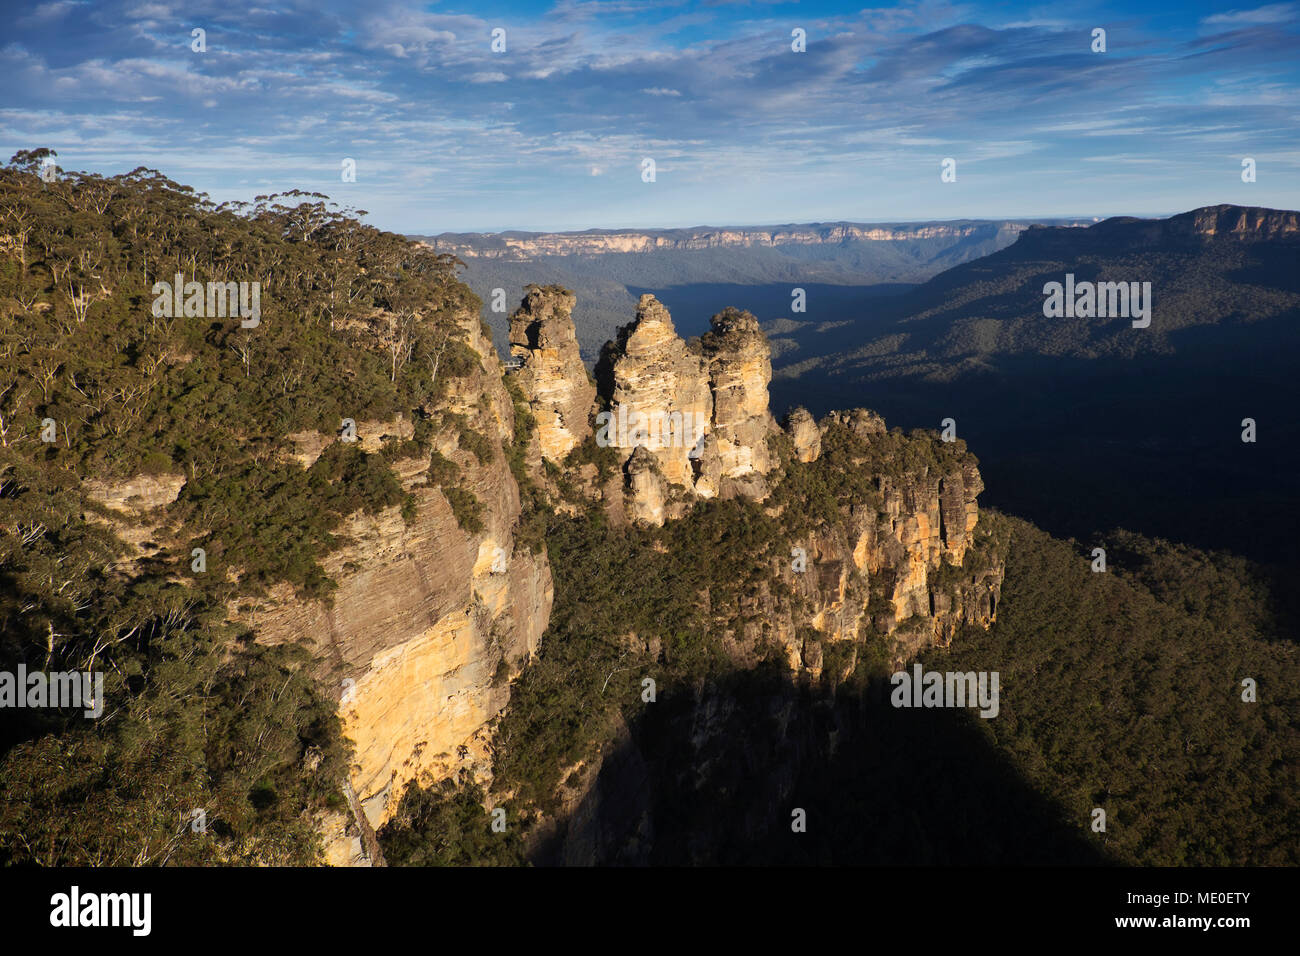 The Three Sisters rock formations and overview of the Blue Mountains National Park in New South Wales, Australia Stock Photo